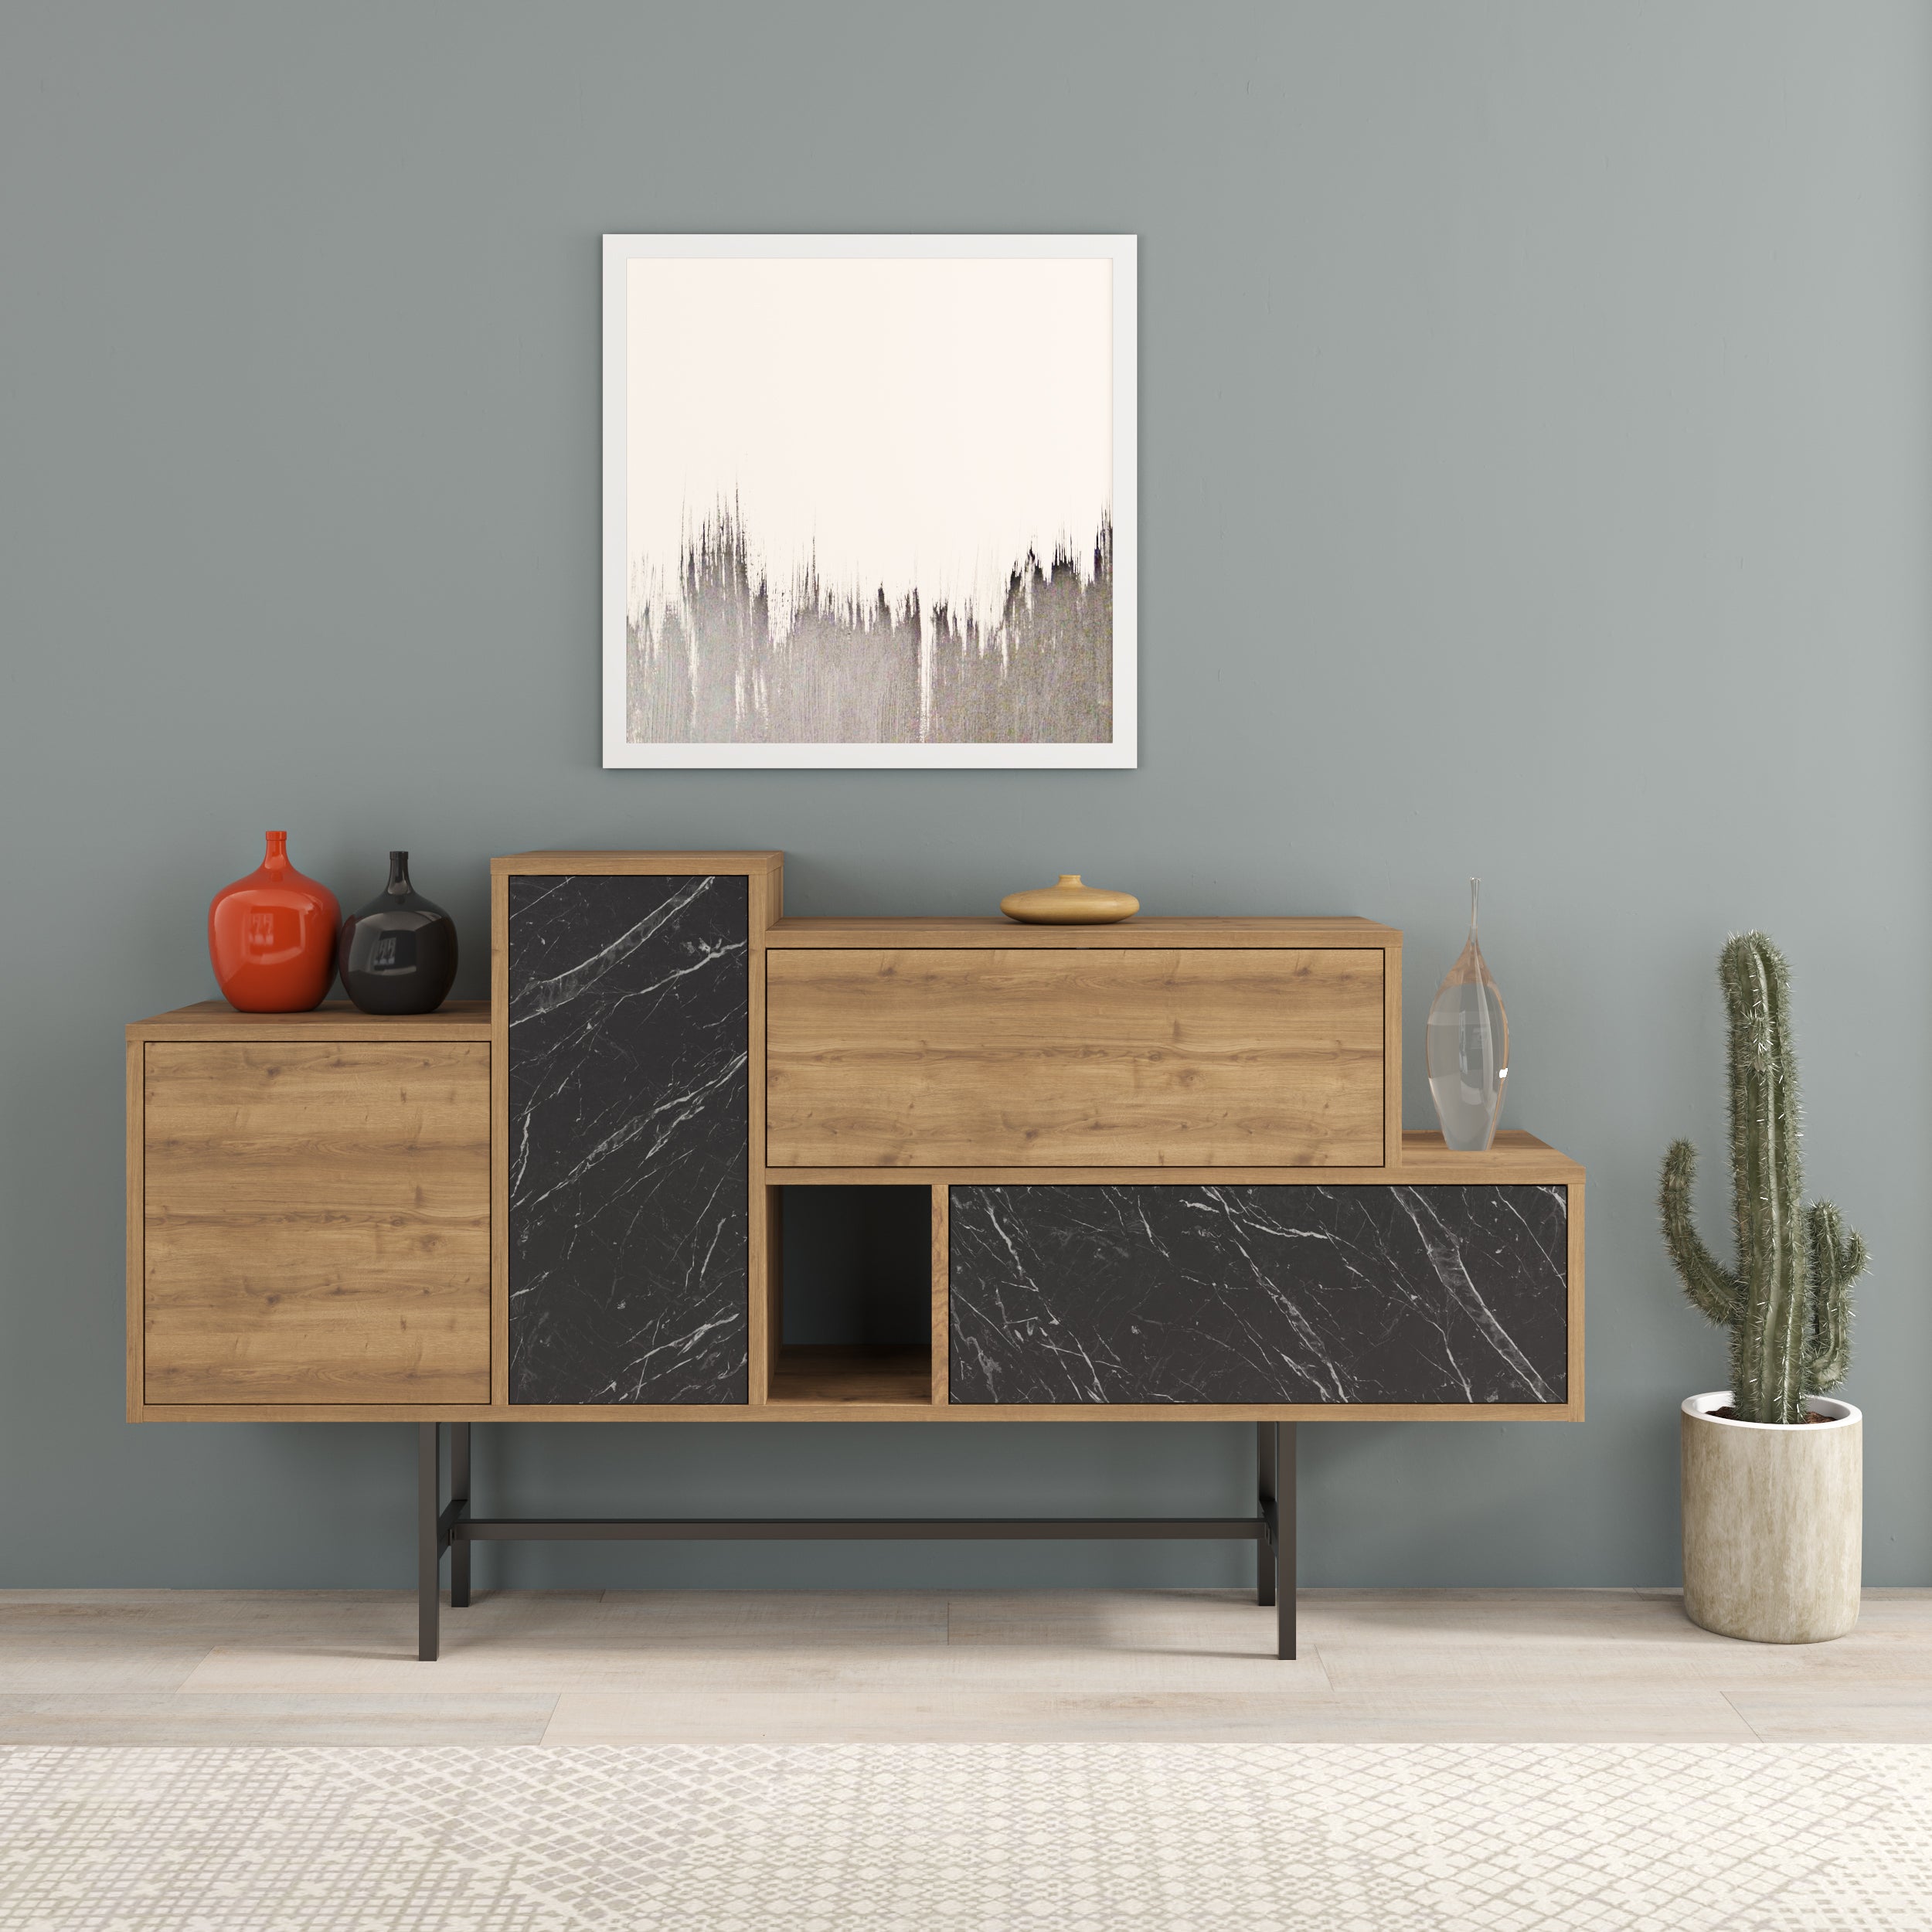 Hermes Console Sideboard Display Unit - Decortie